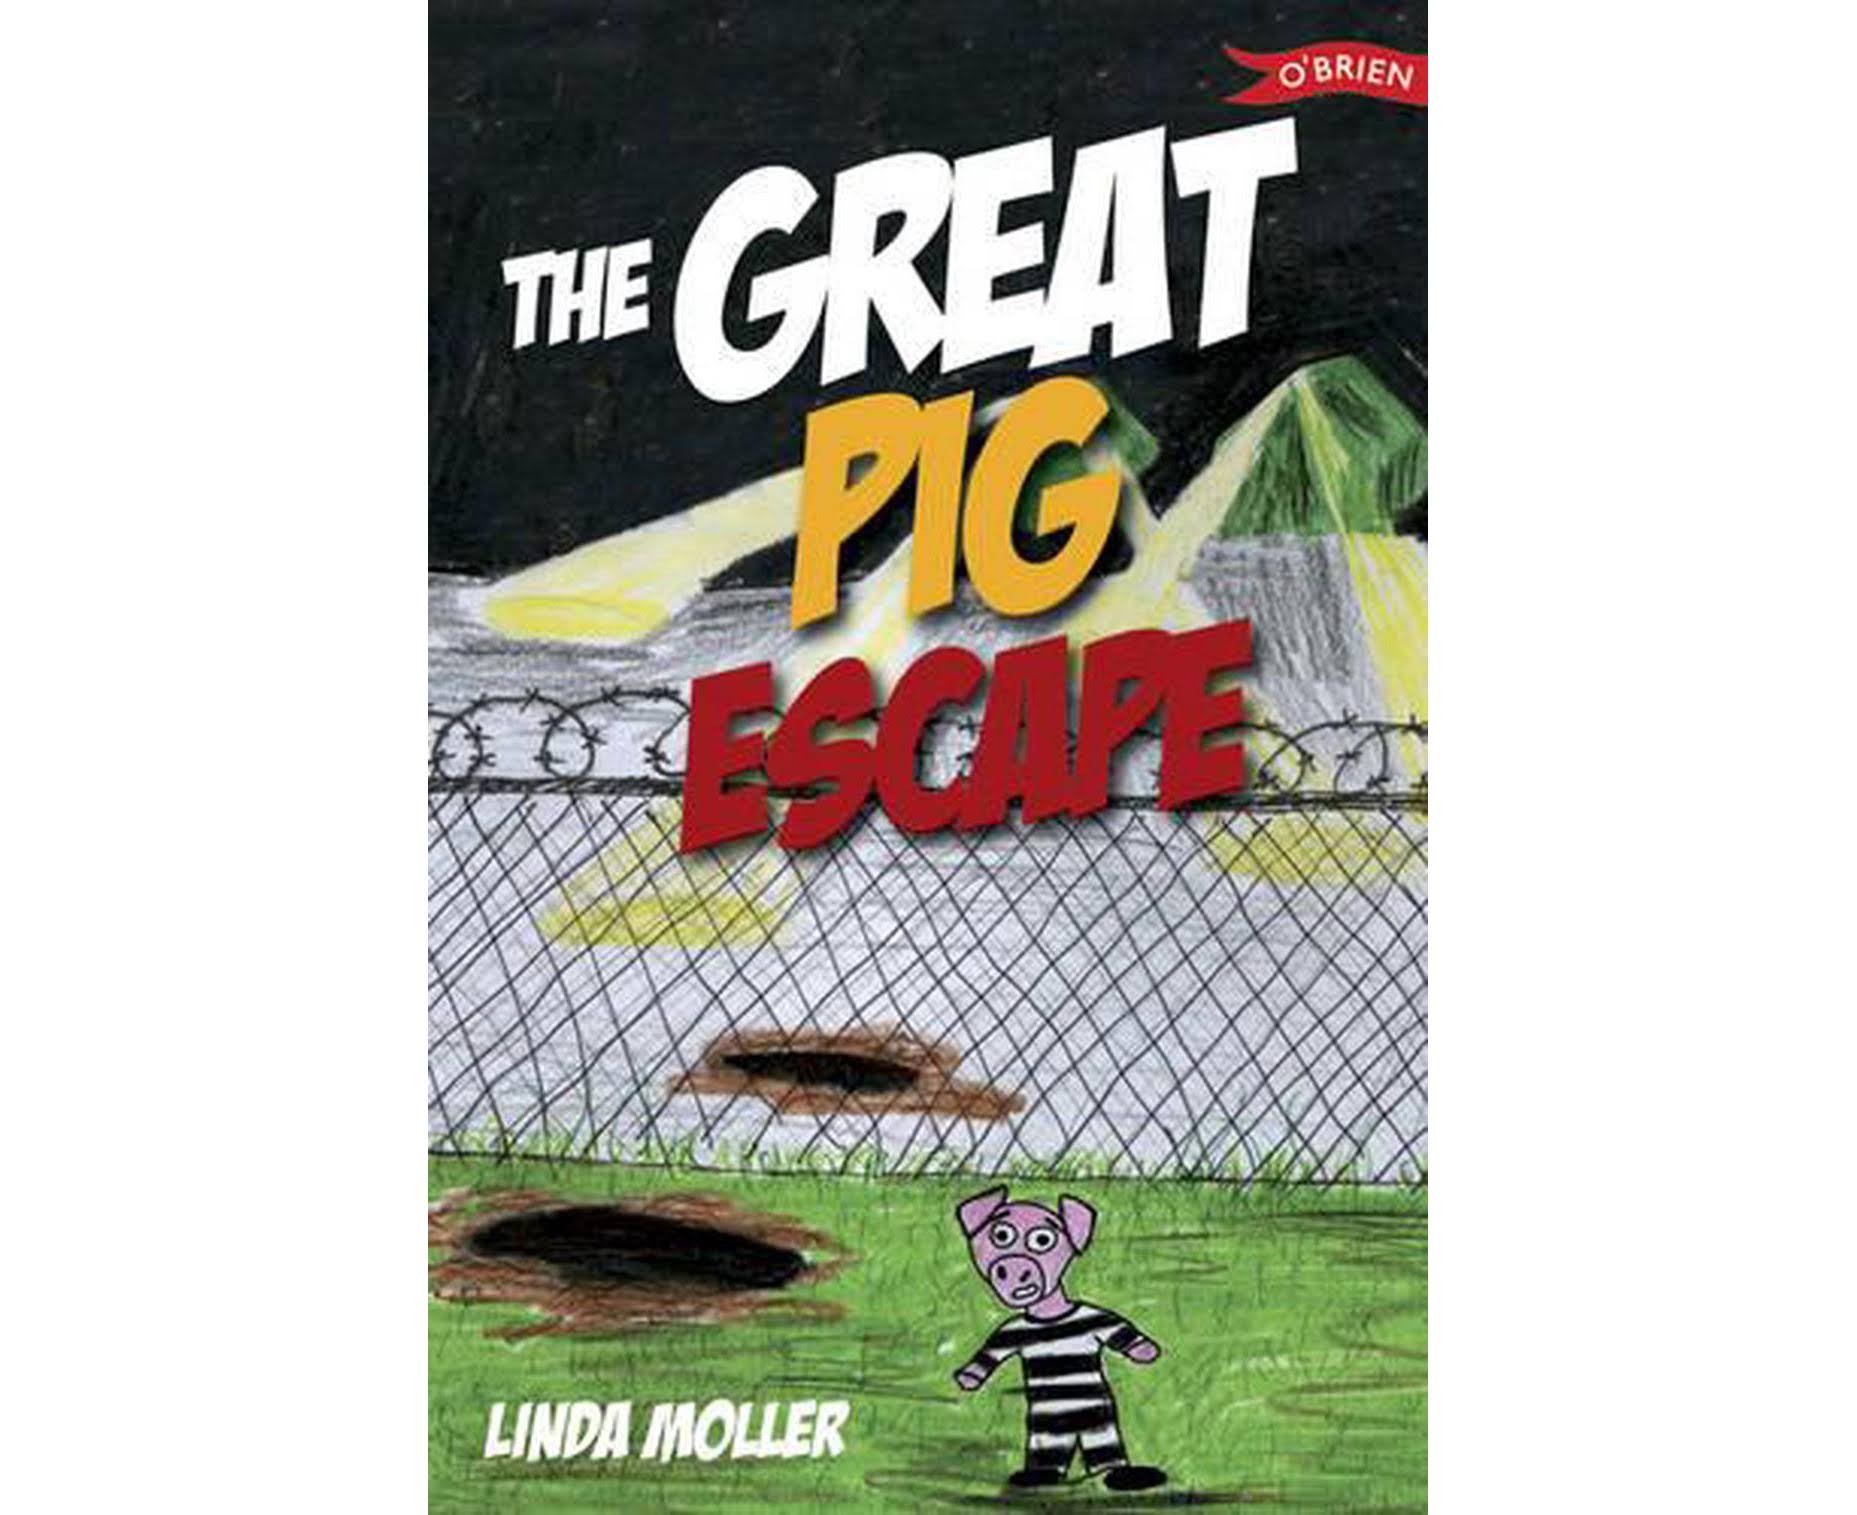 The Great Pig Escape [Book]